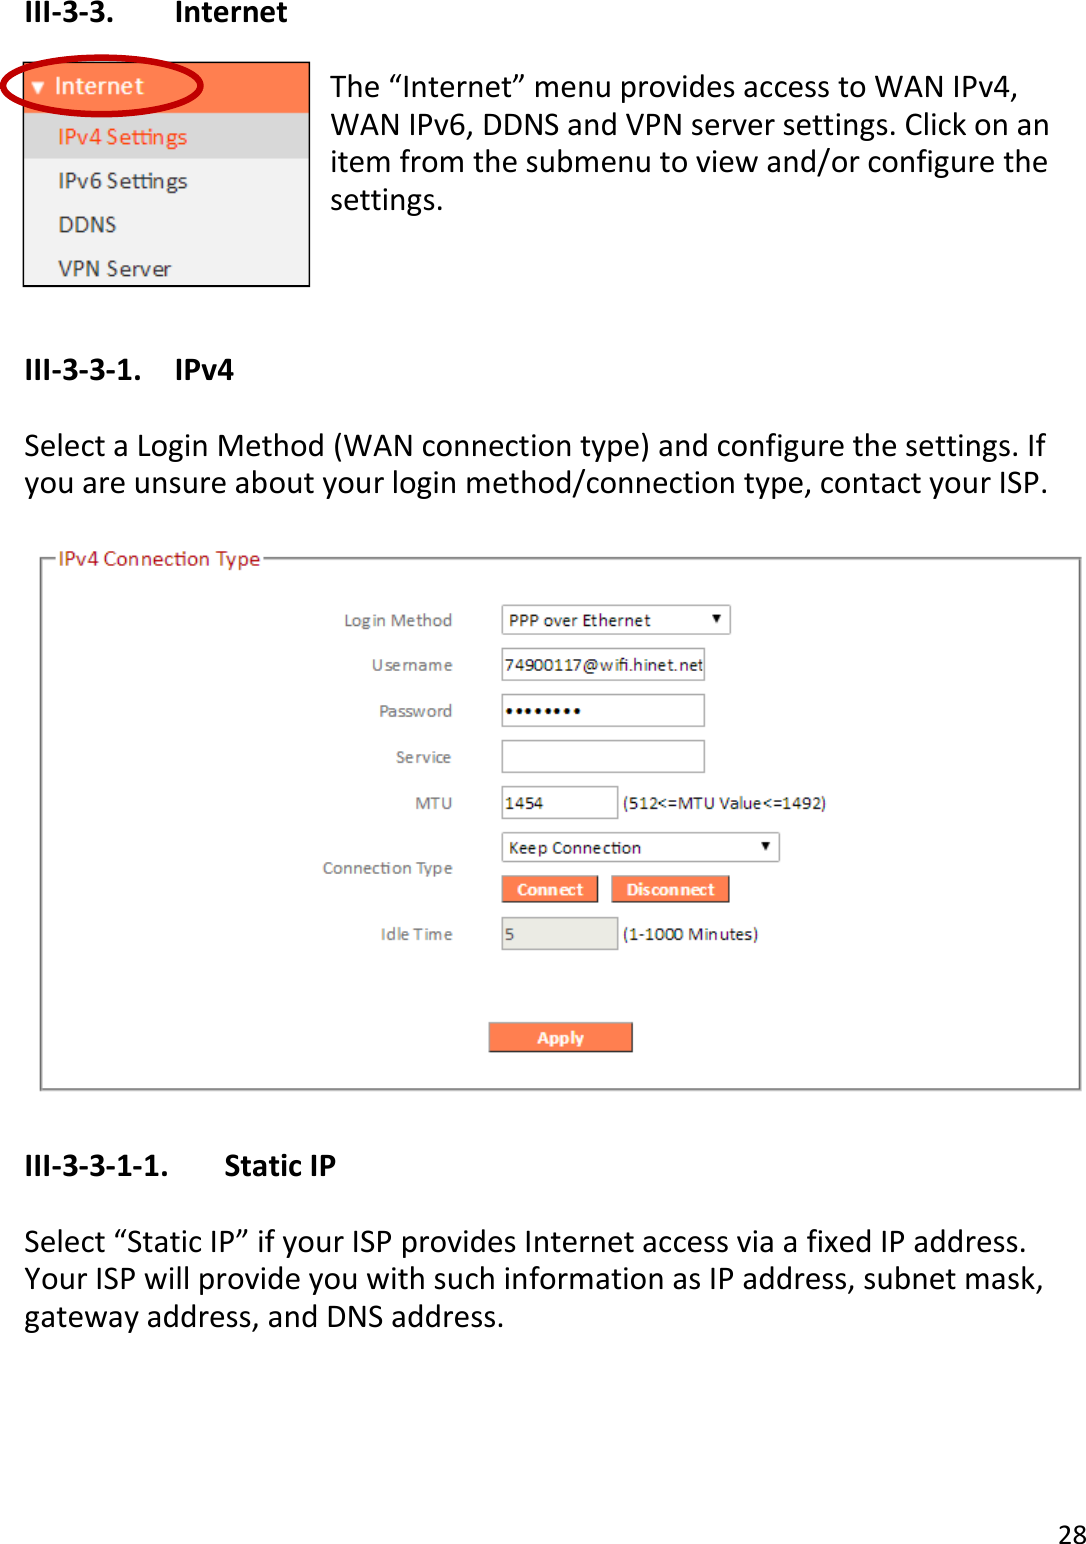 28  III-3-3.    Internet  The “Internet” menu provides access to WAN IPv4, WAN IPv6, DDNS and VPN server settings. Click on an item from the submenu to view and/or configure the settings.   III-3-3-1.  IPv4  Select a Login Method (WAN connection type) and configure the settings. If you are unsure about your login method/connection type, contact your ISP.    III-3-3-1-1.    Static IP  Select “Static IP” if your ISP provides Internet access via a fixed IP address. Your ISP will provide you with such information as IP address, subnet mask, gateway address, and DNS address.  